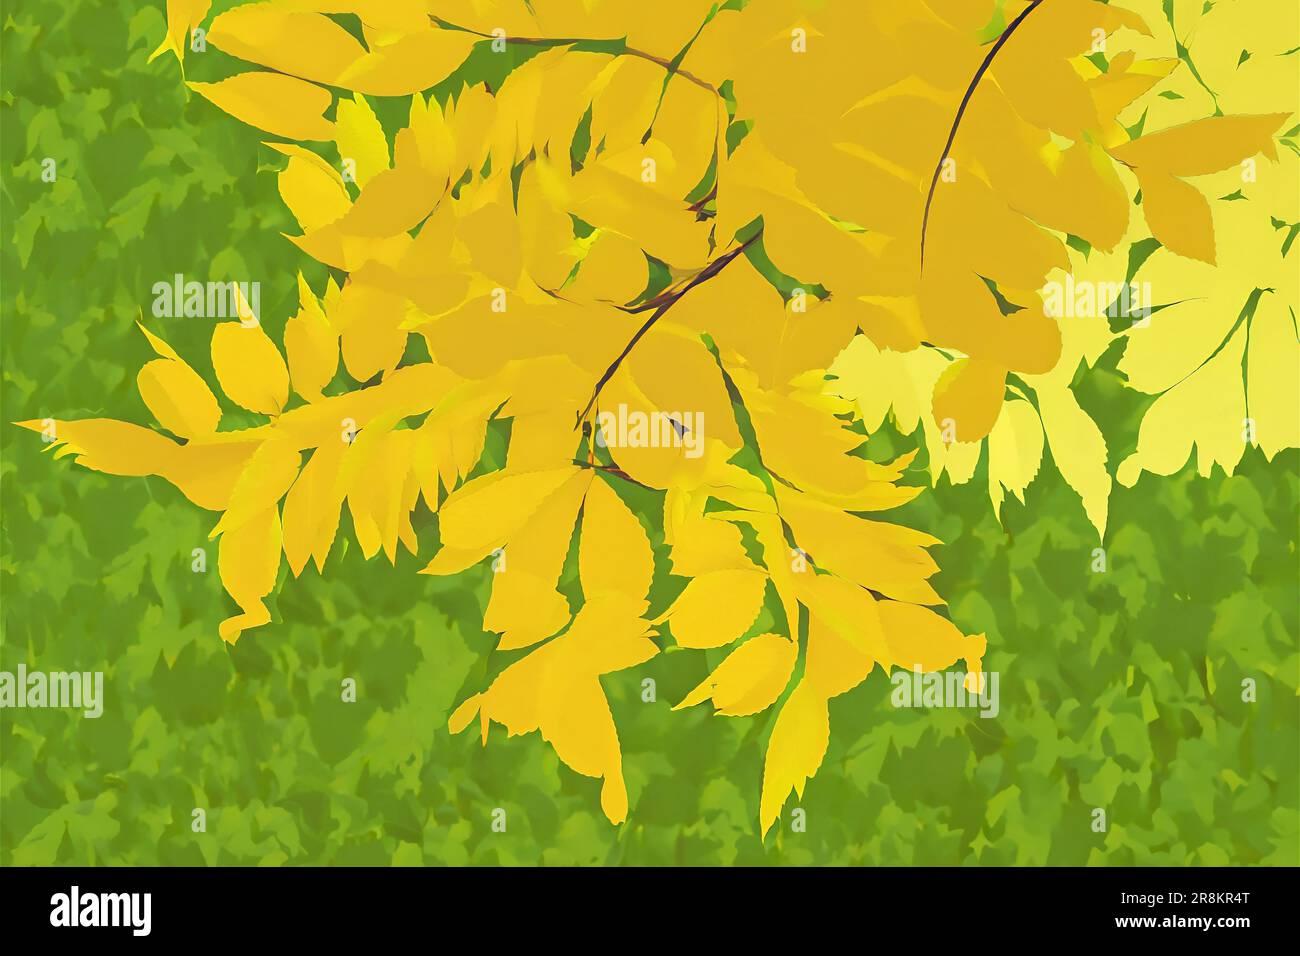 Yellow leaves fall from trees, close-up. Background lining for text. Abstract background with autumn leaves. Autumn background Stock Photo